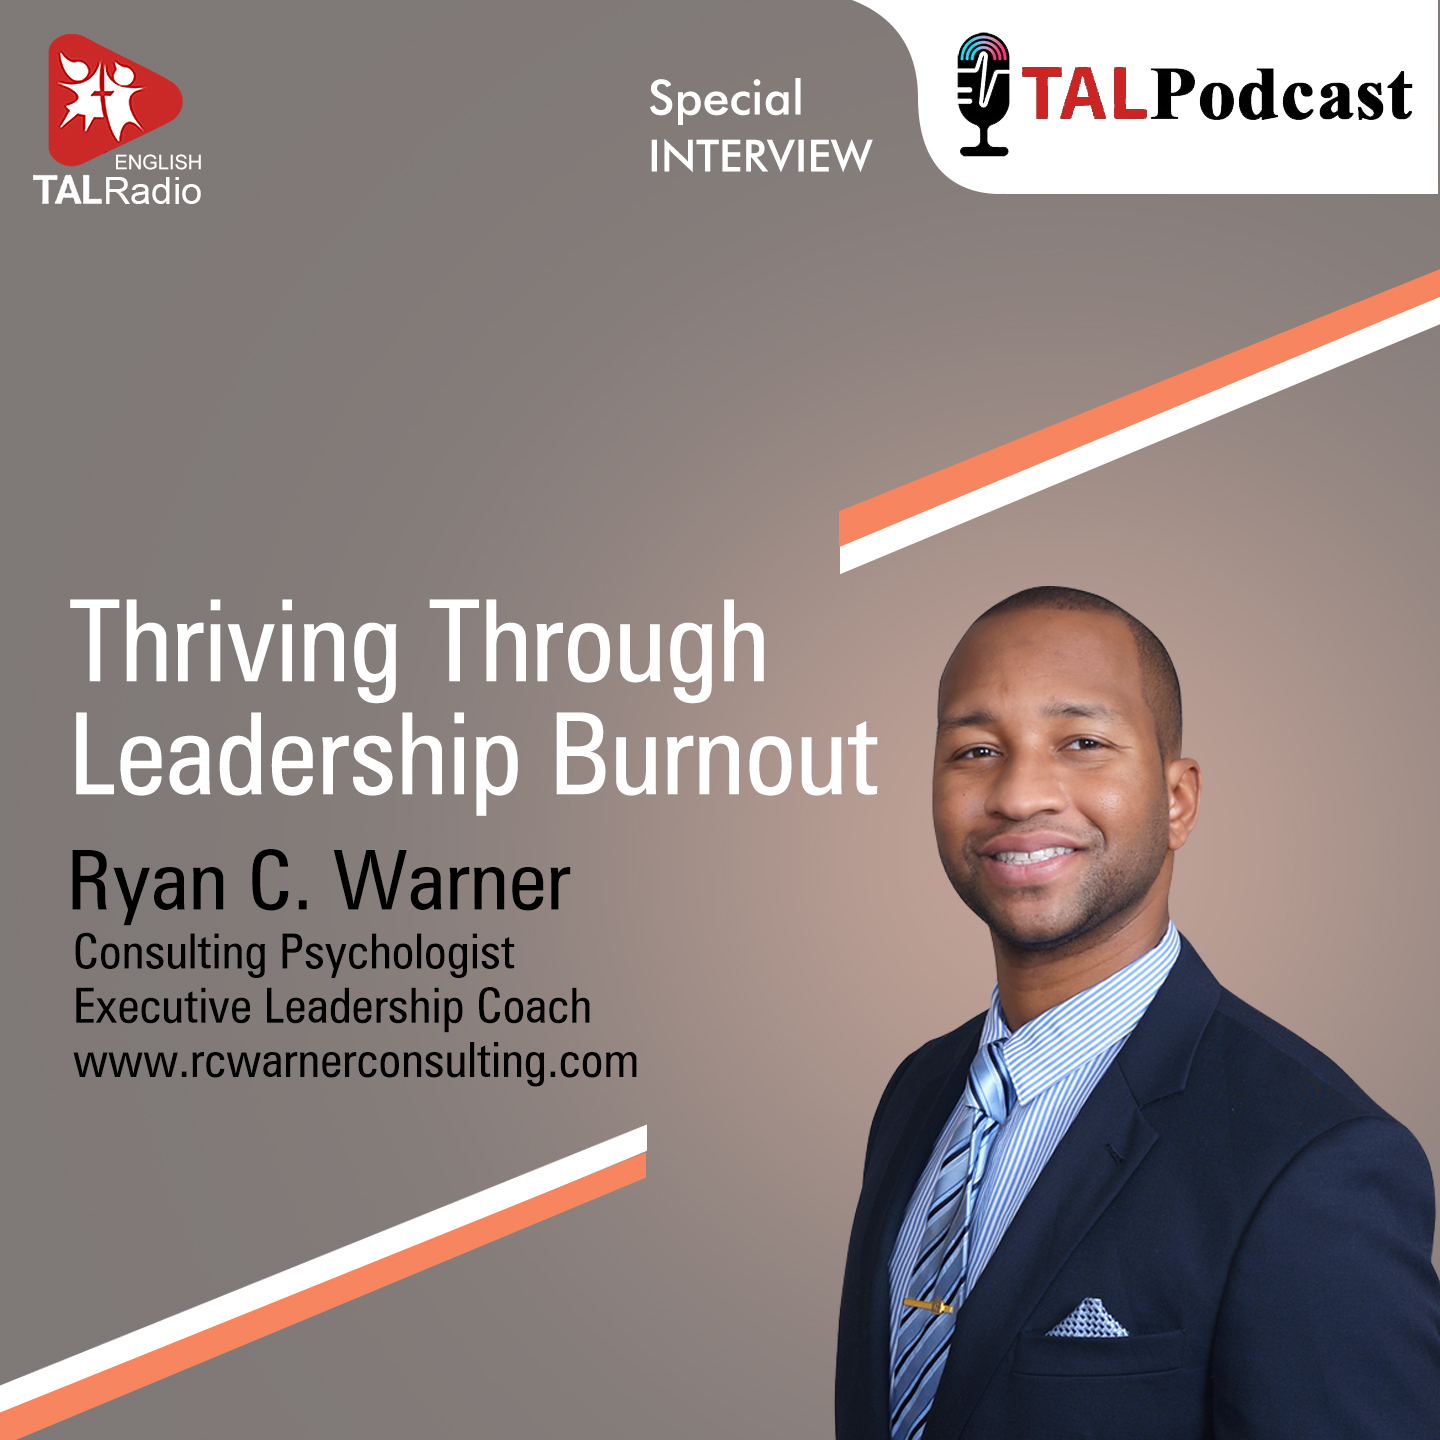 Thriving through Leadership Burnout | Special Interview With RYan C.Warner